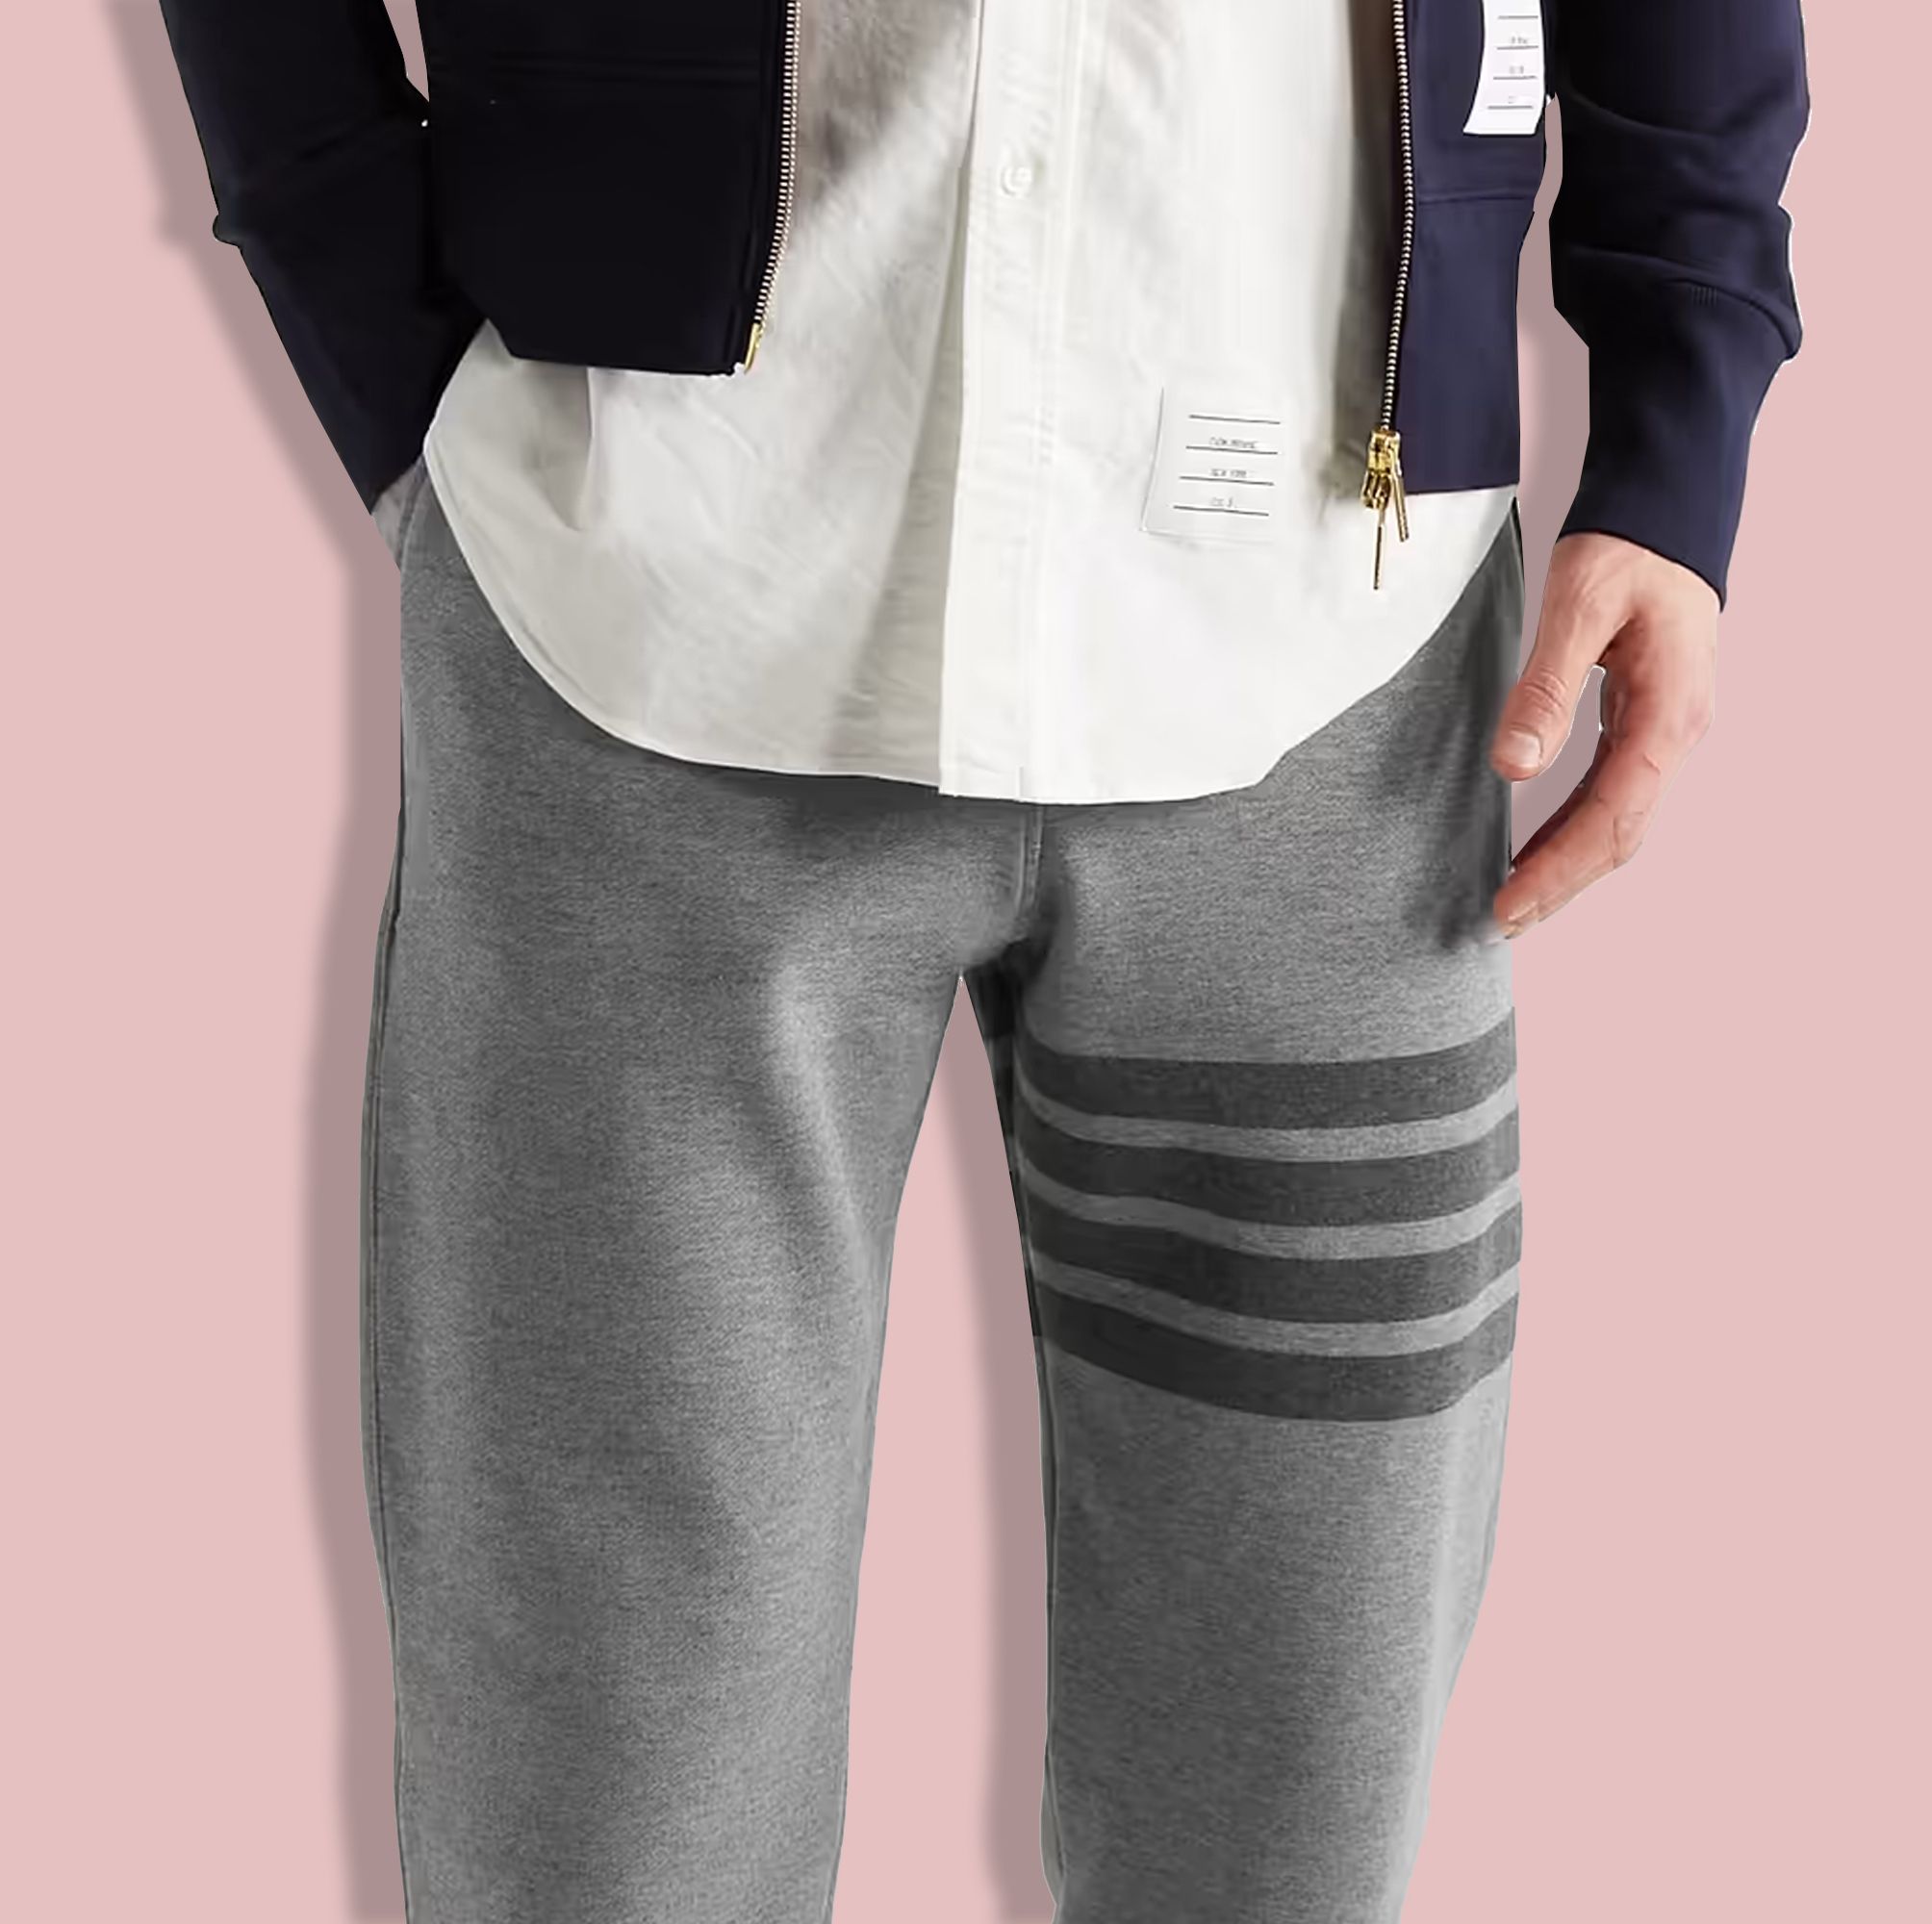 The 20 Best Joggers That You'll Probably Never Wear For an Actual Jog